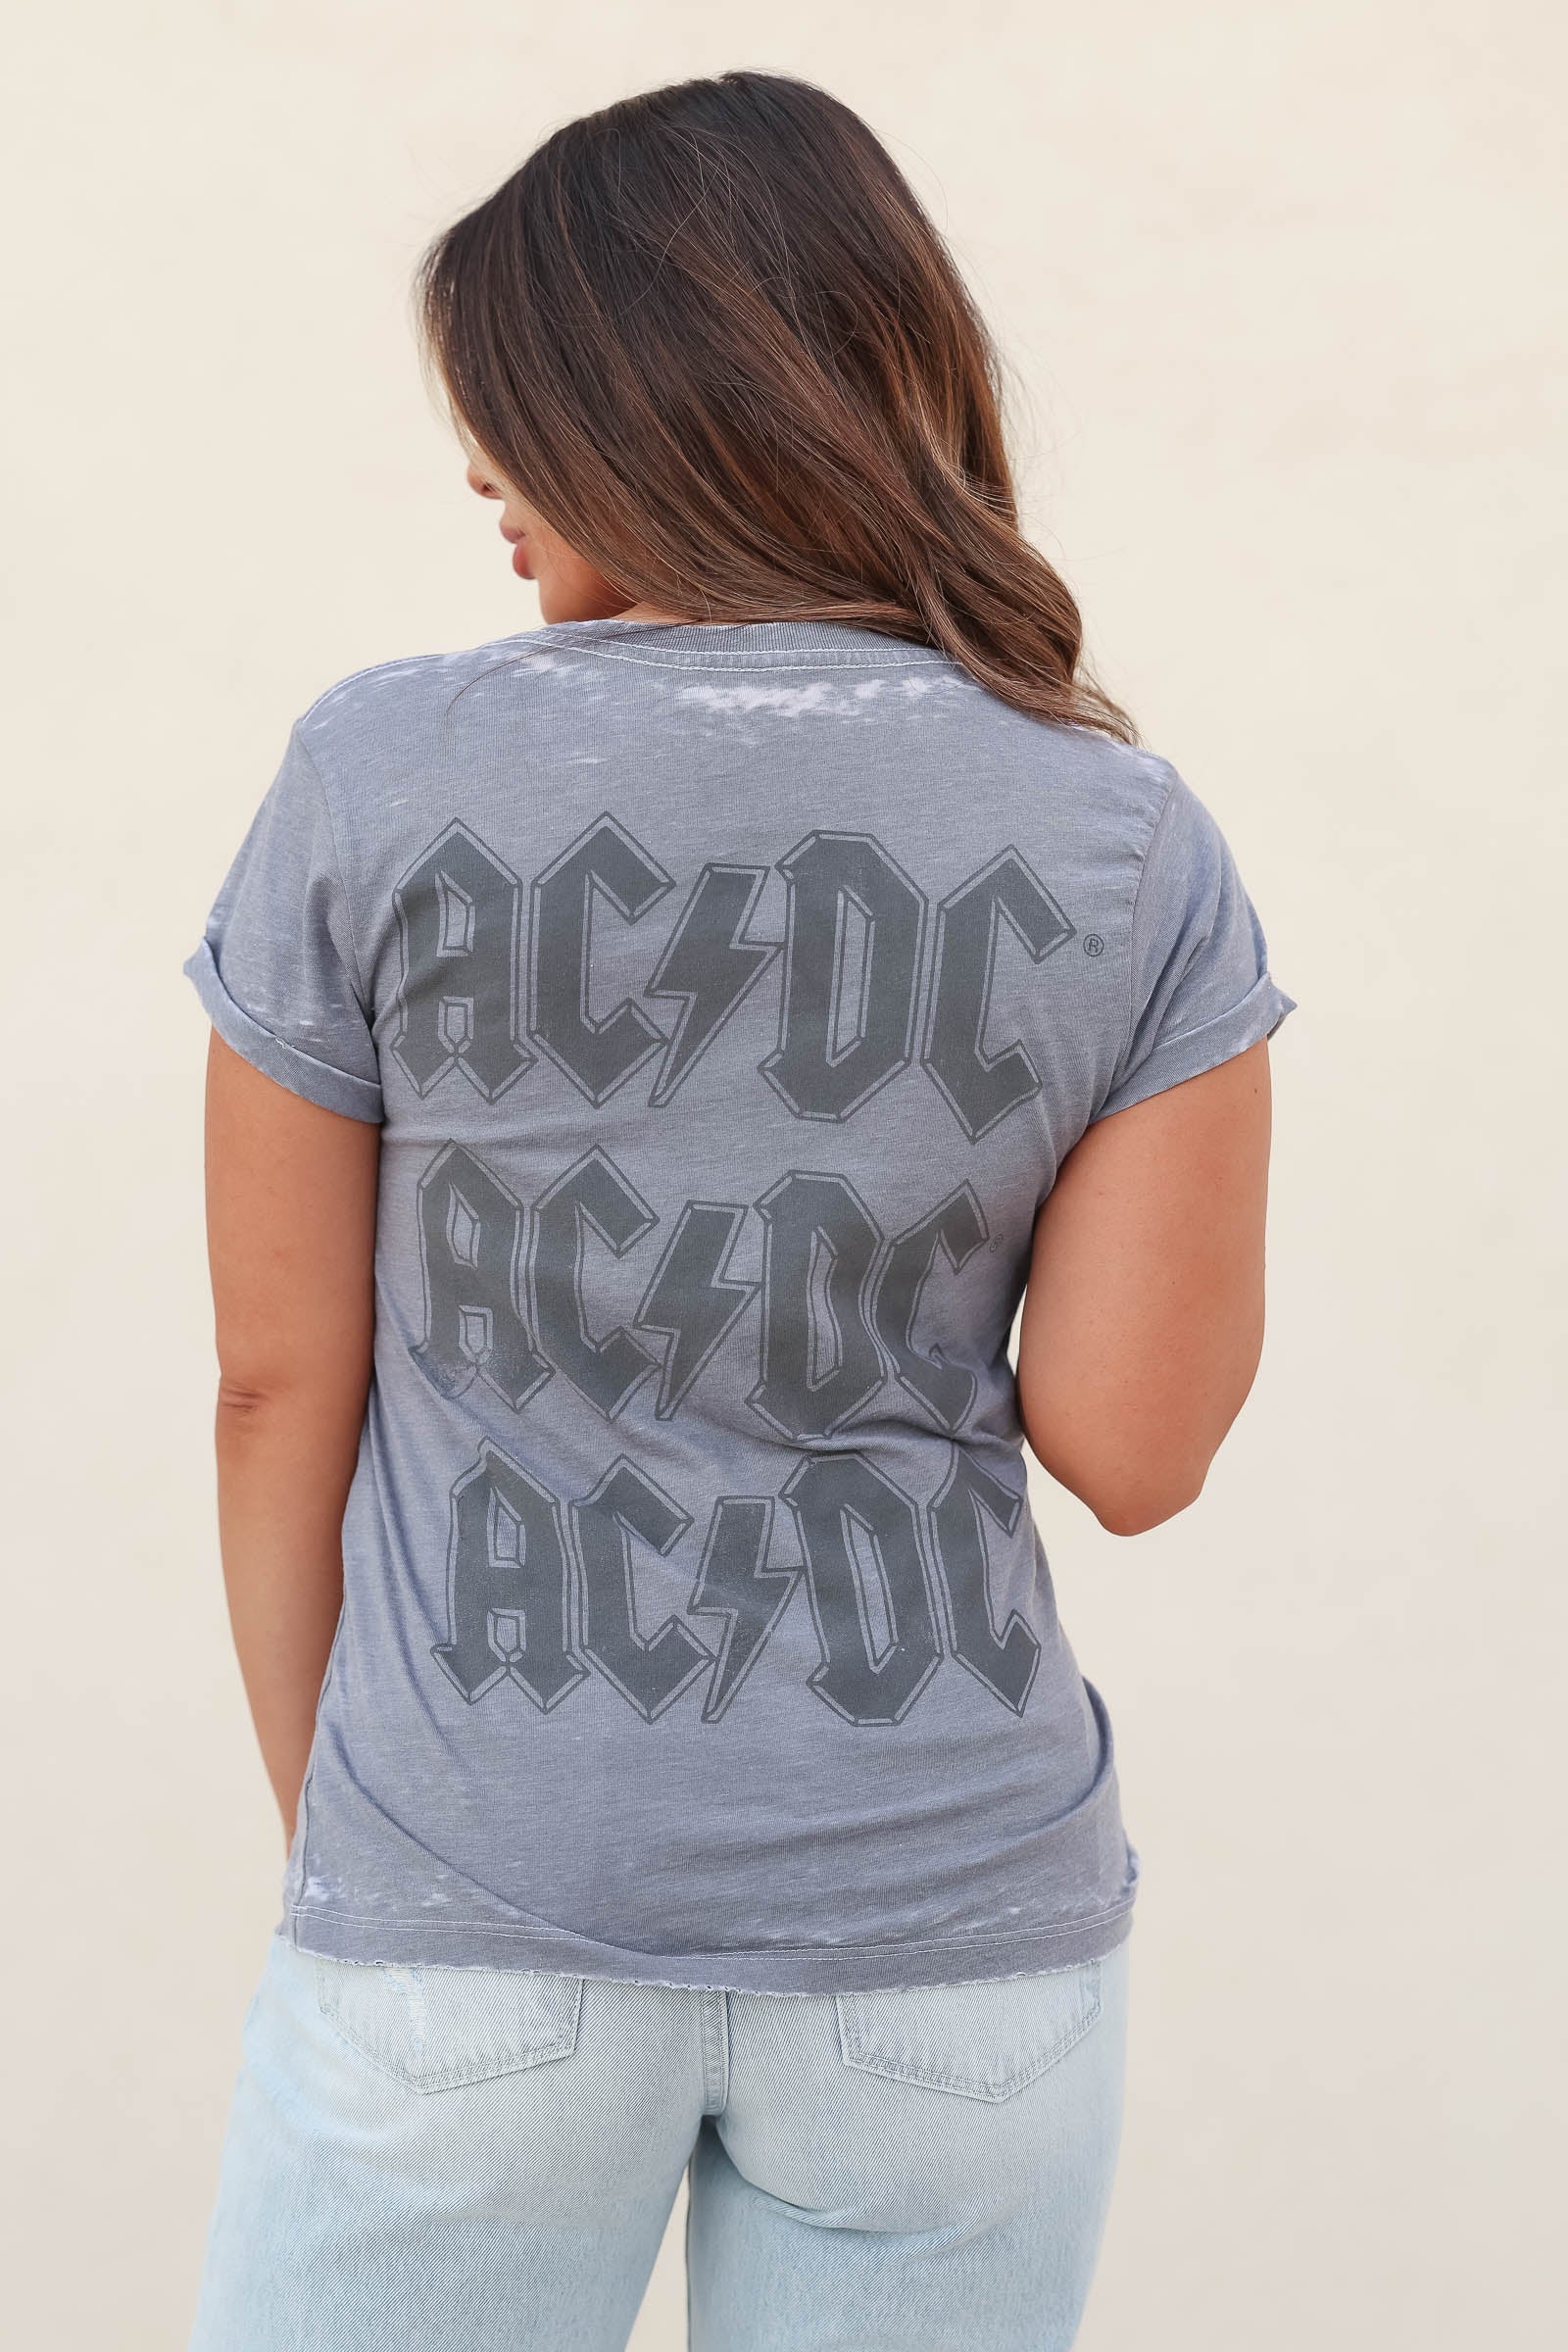 "ACDC" Lighting Bolt Graphic Tee - Grey, Closet Candy, 1